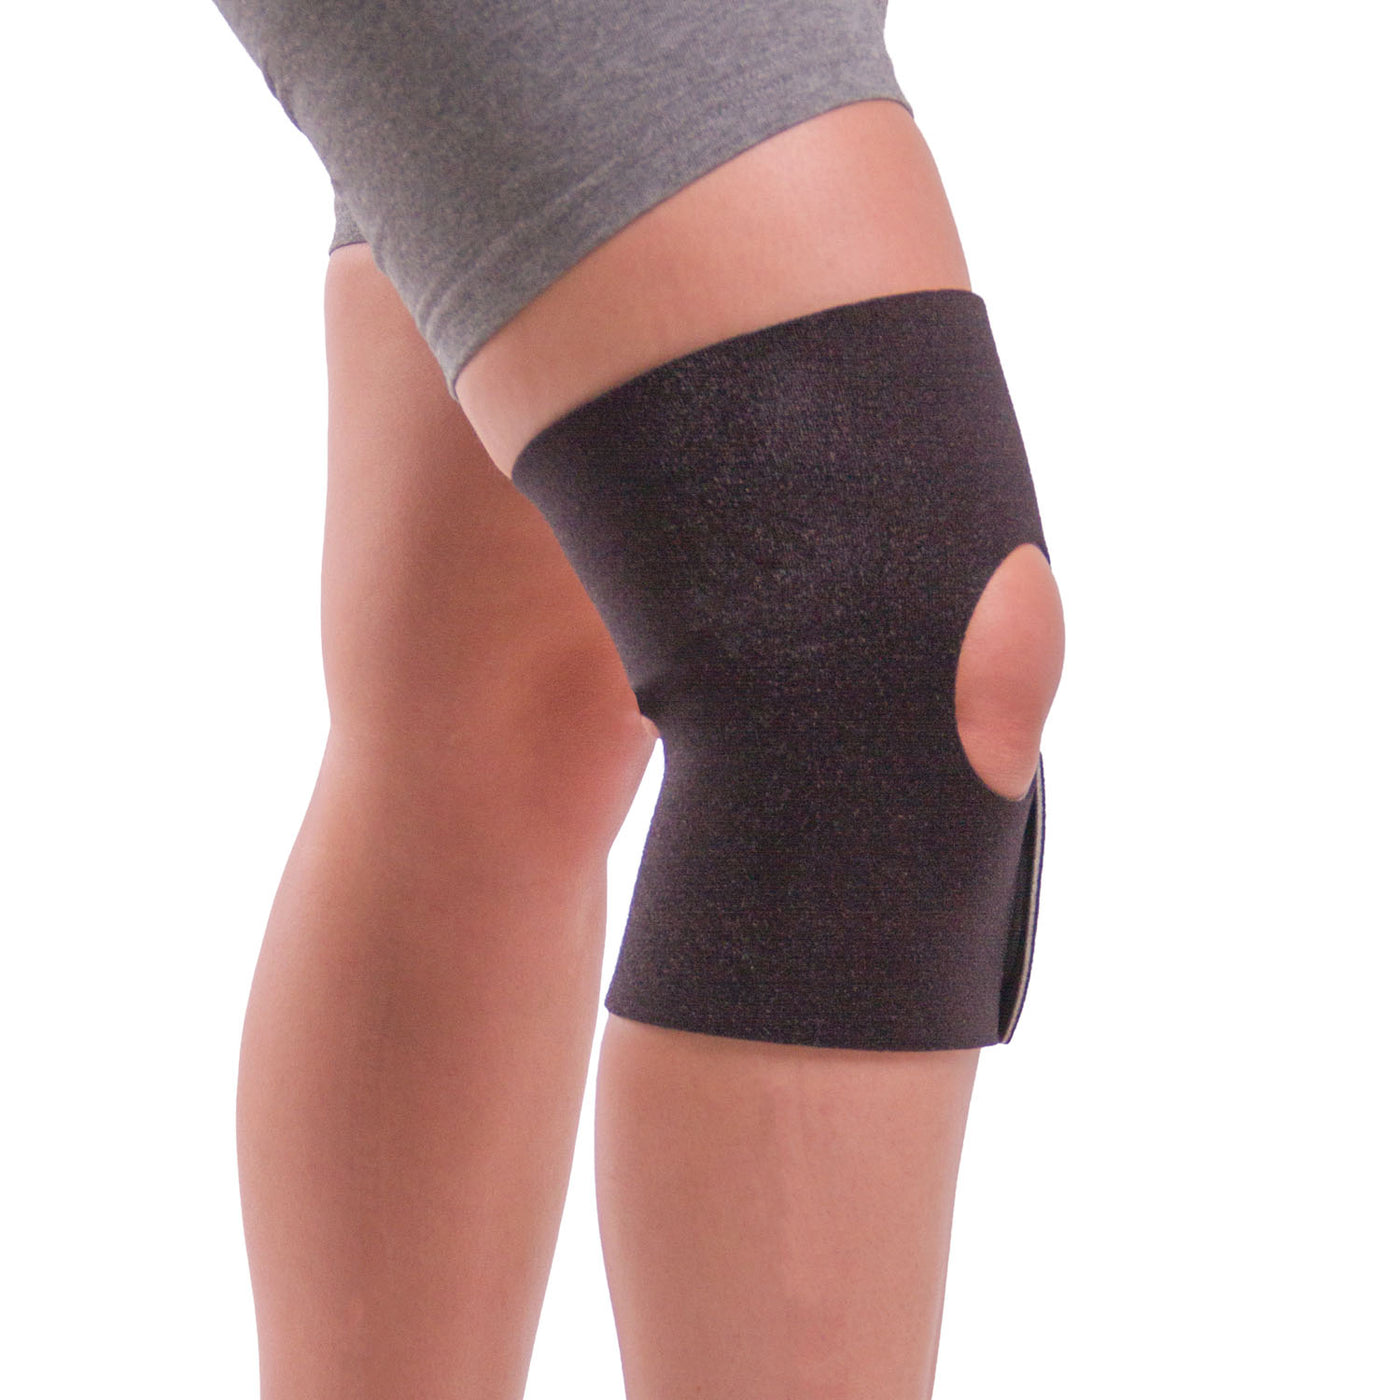 Knee pads - thighs - hips - American football - Sport house Store